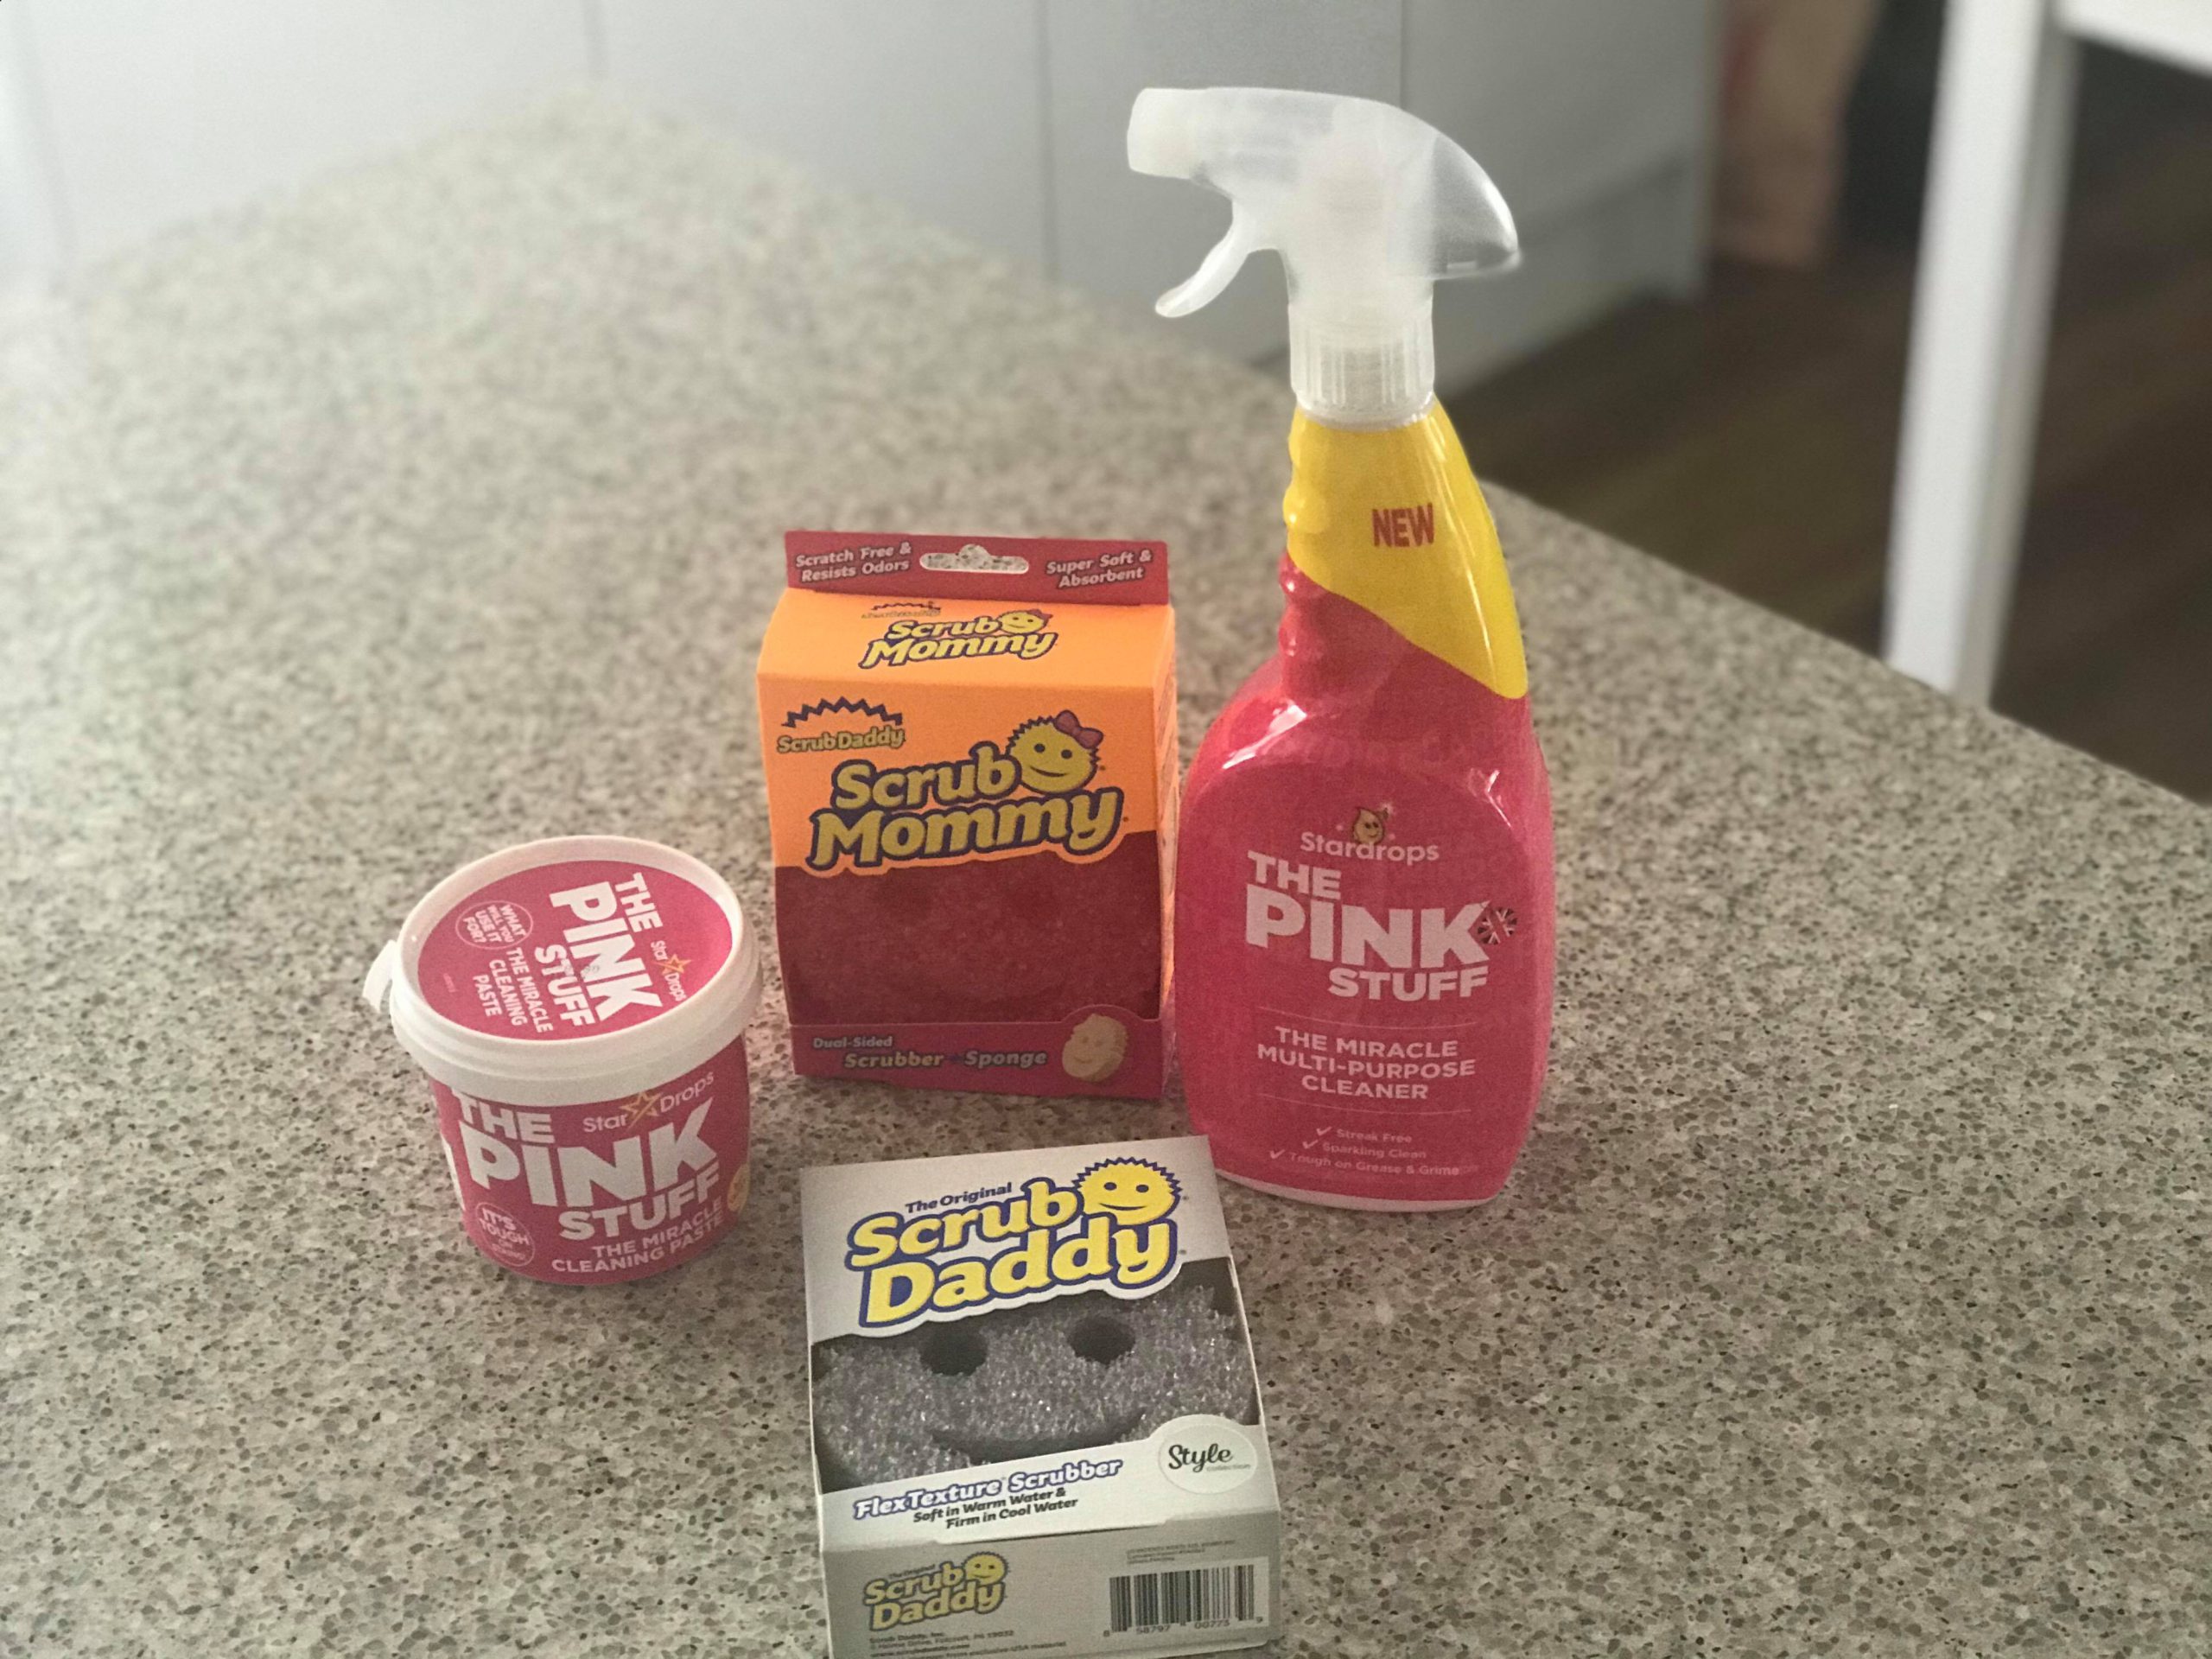 Scrub Daddy and The Pink Stuff: Add a Smile to Your Spring Cleaning